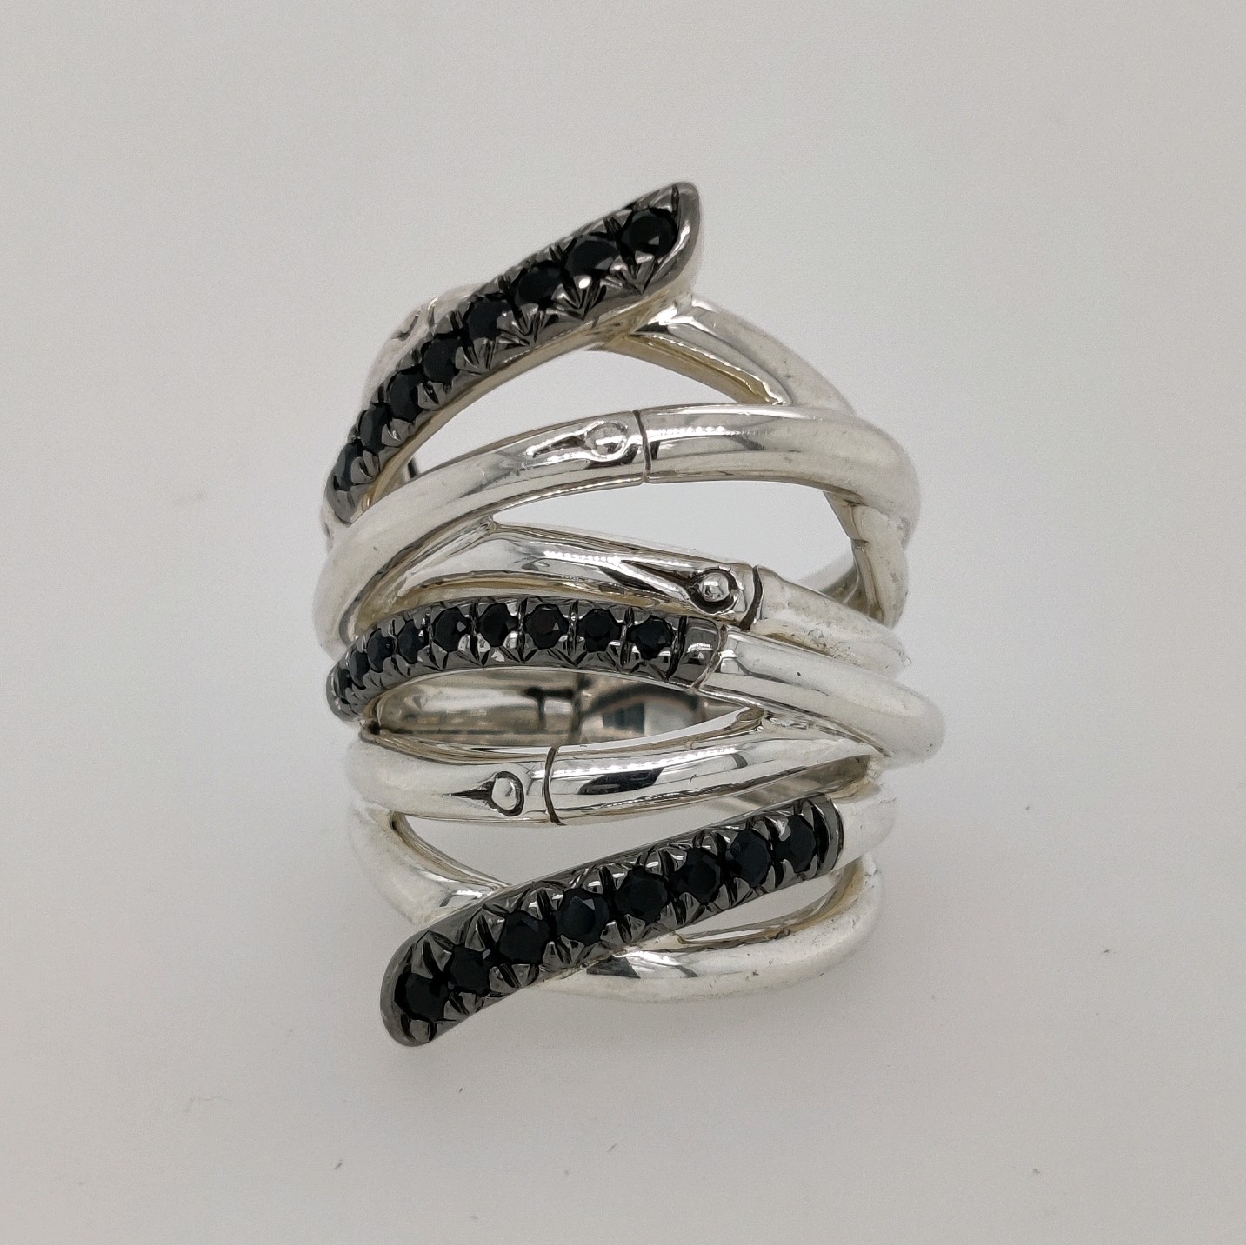 New In Box John Hardy Sterling Silver Bamboo Lava Extra Wide Ring with Black Sapphires; size 6.25

Comes with Box and Papers